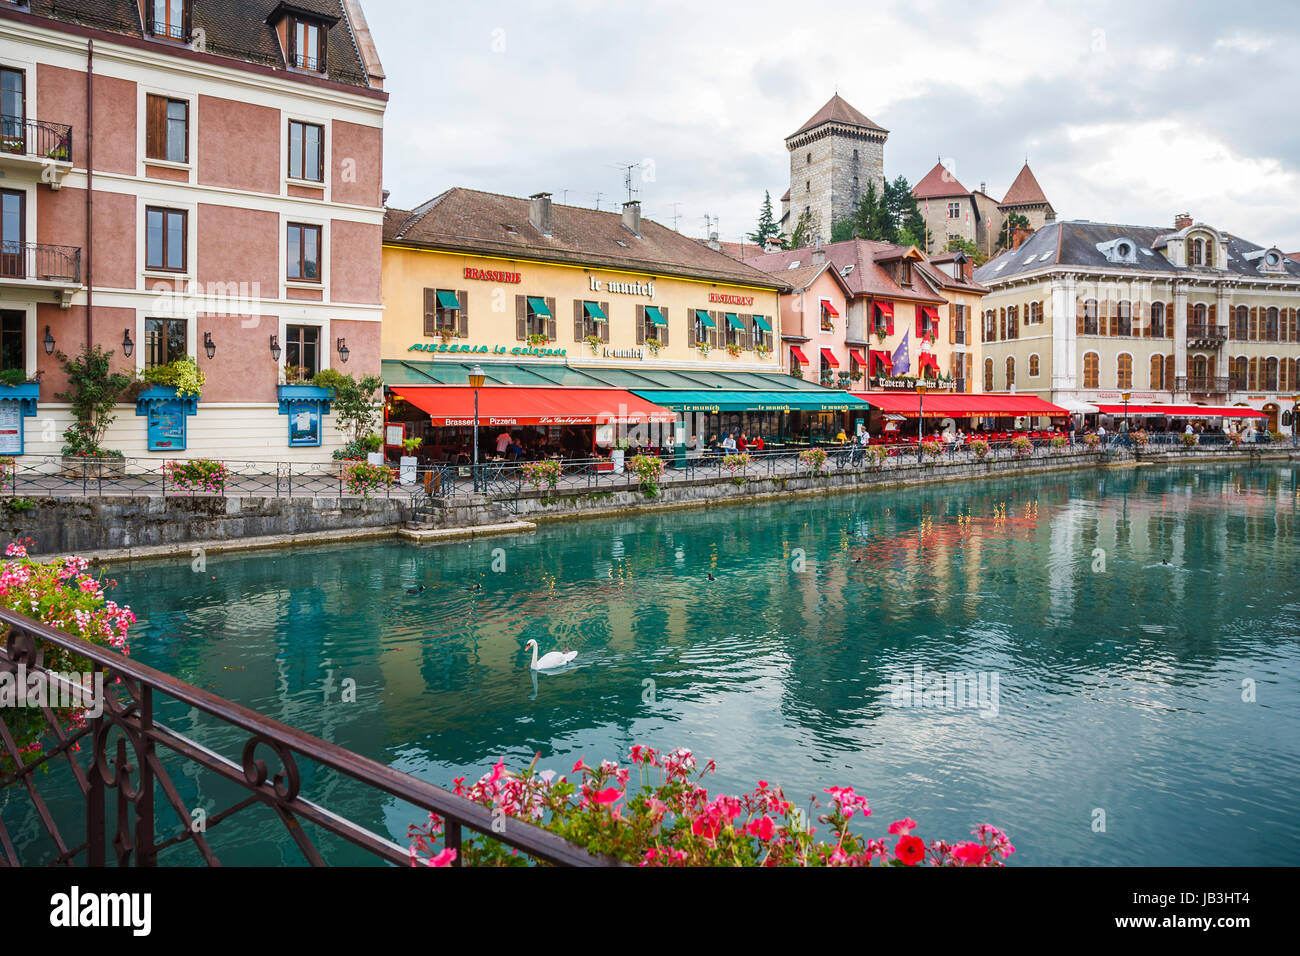 Restaurants and cafes with colourful red and green awnings in historic buildings along the bank of the Thiou river in the old town of Annecy, France Stock Photo